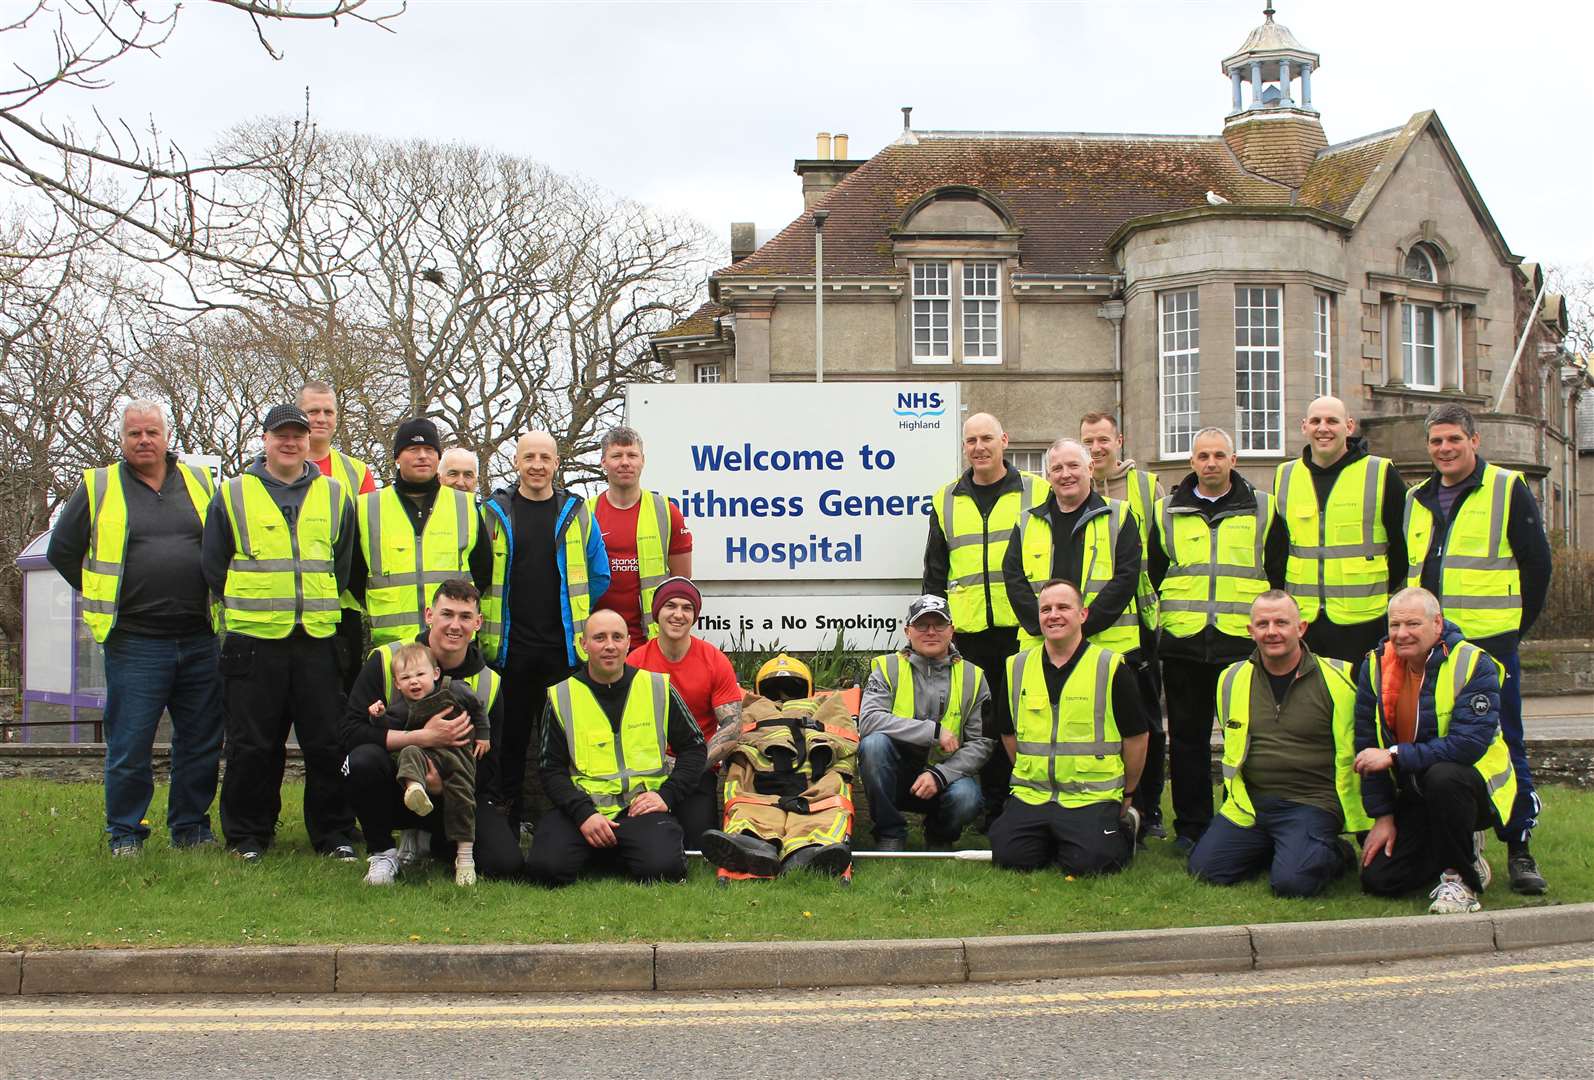 Members of the Dounreay Fire, Ambulance and Rescue Service at Caithness General Hospital on April 28 after their sponsored stretcher-carry in aid of two good causes. Picture: Alan Hendry